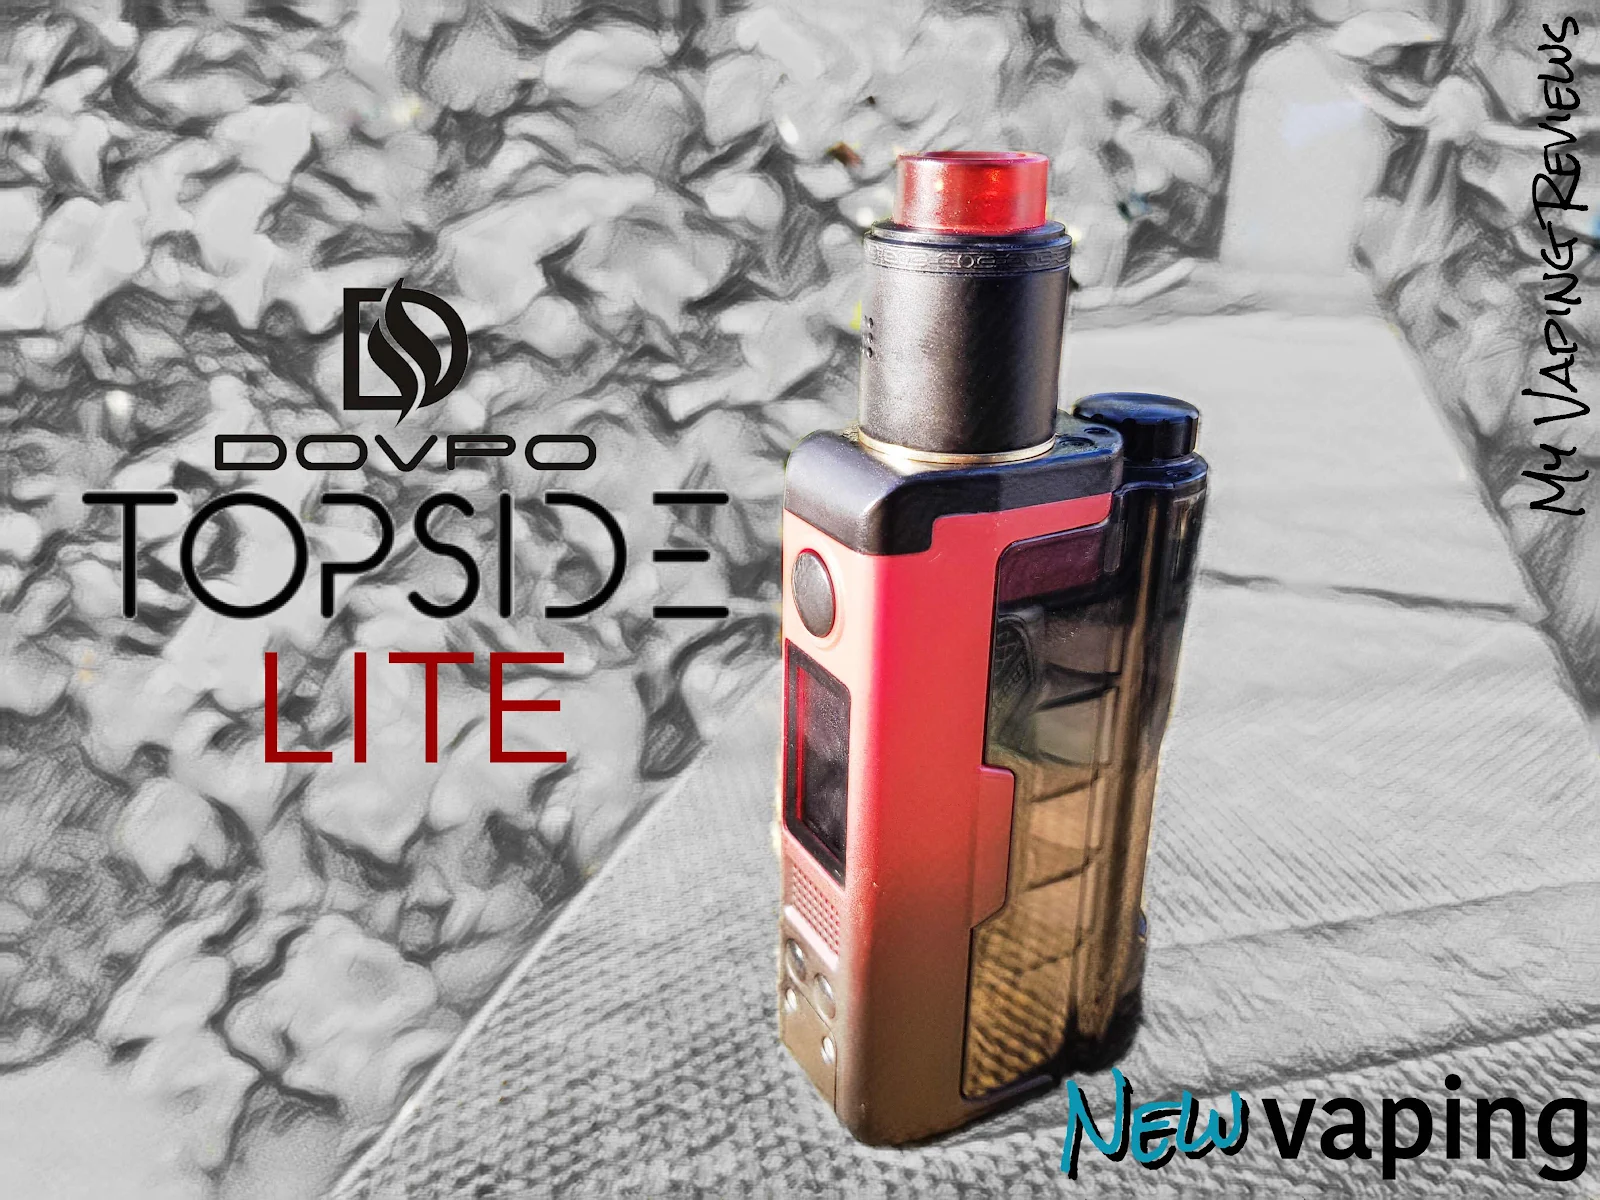 Dovpo Topside Lite Review | My Vaping Reviews